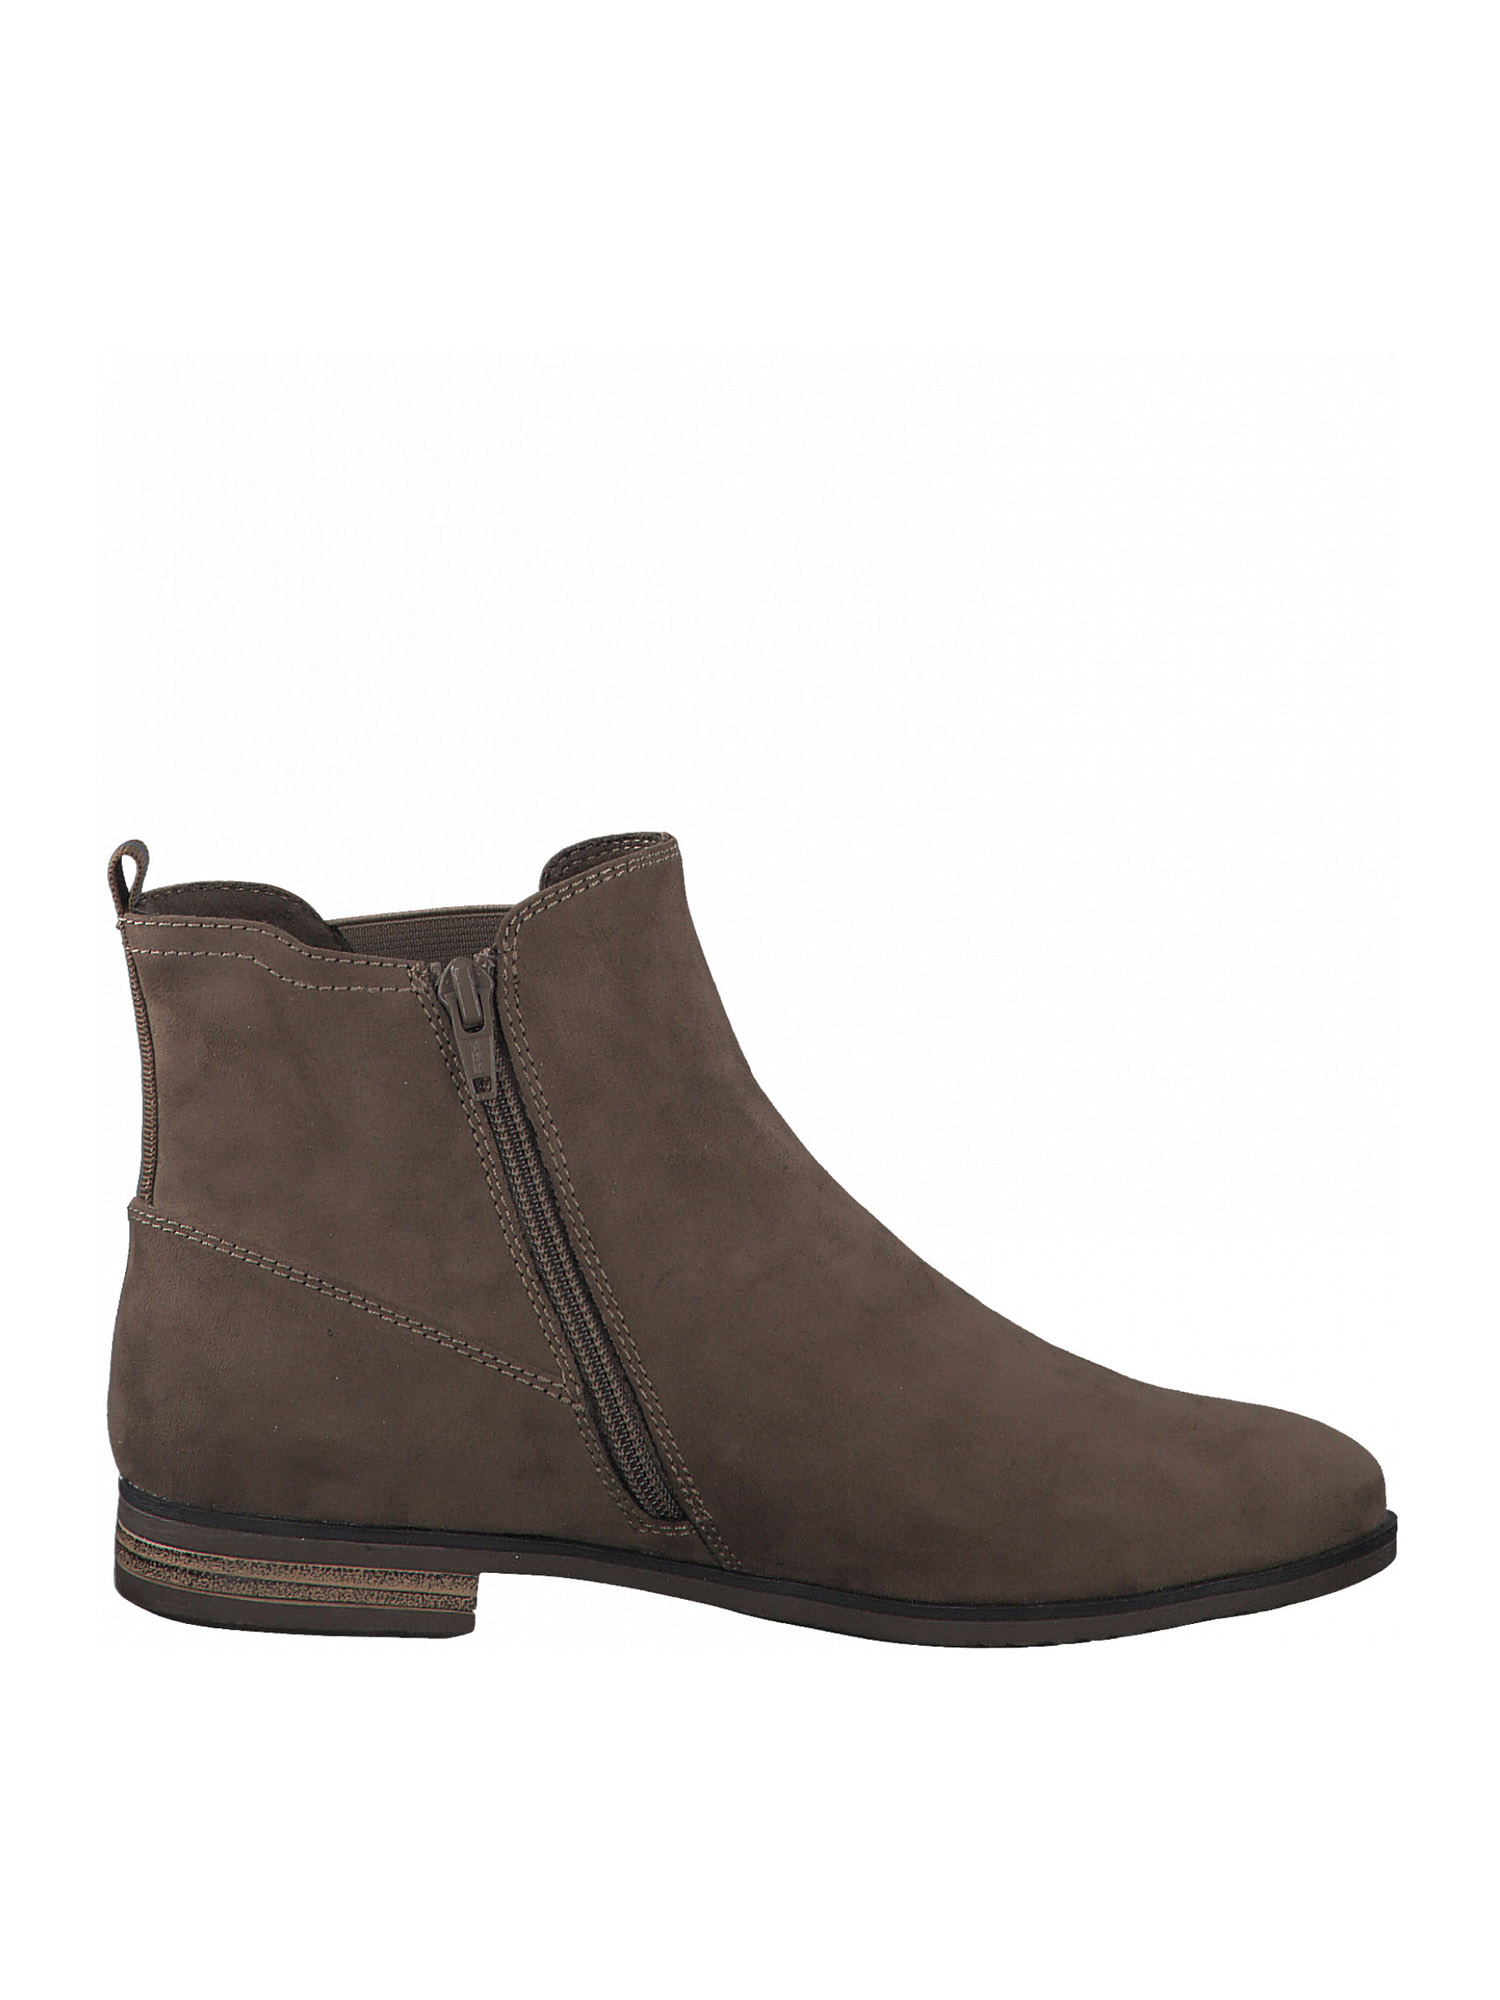 s.Oliver Chelsea Boots in Braun 